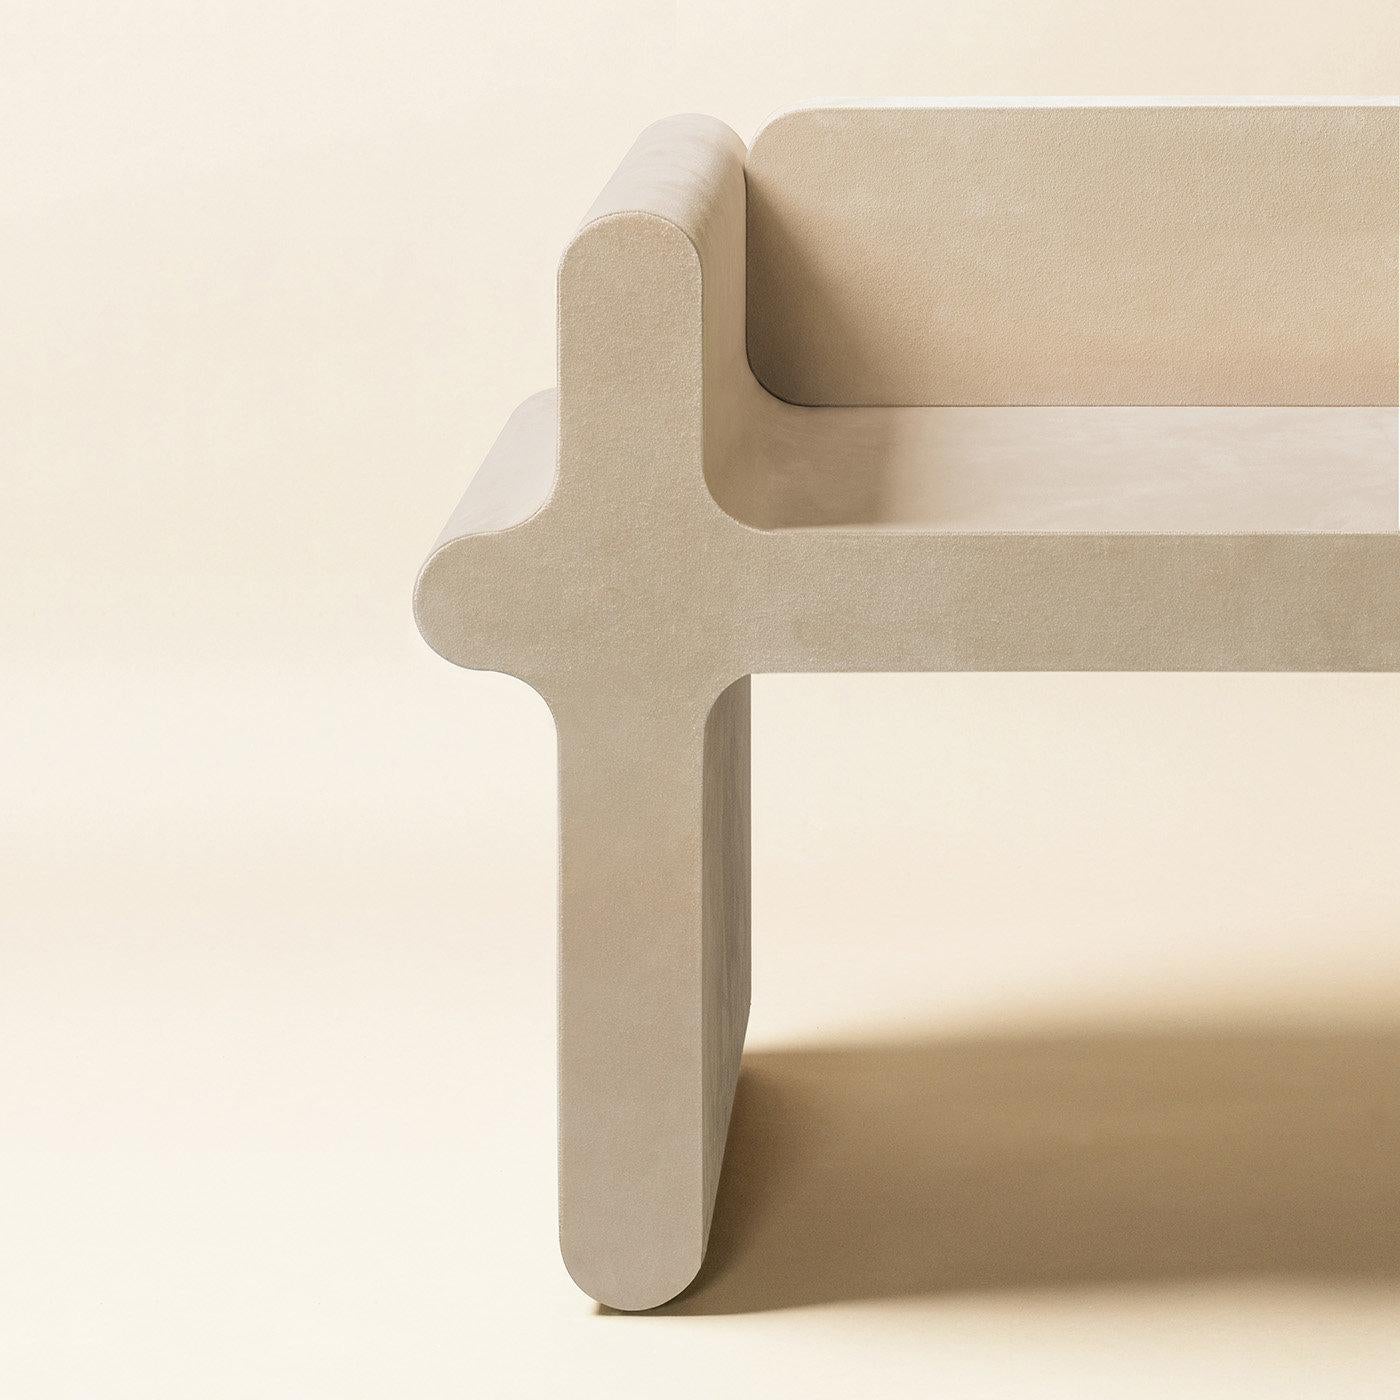 Contemporary suede leather stool - Ossicle N.2 by Francesco Balzano for Giobagnara.
The object presented in the image has following finish: A06 ivory suede leather.

Defined by soft and delicate lines, this chair is superbly upholstered in beige